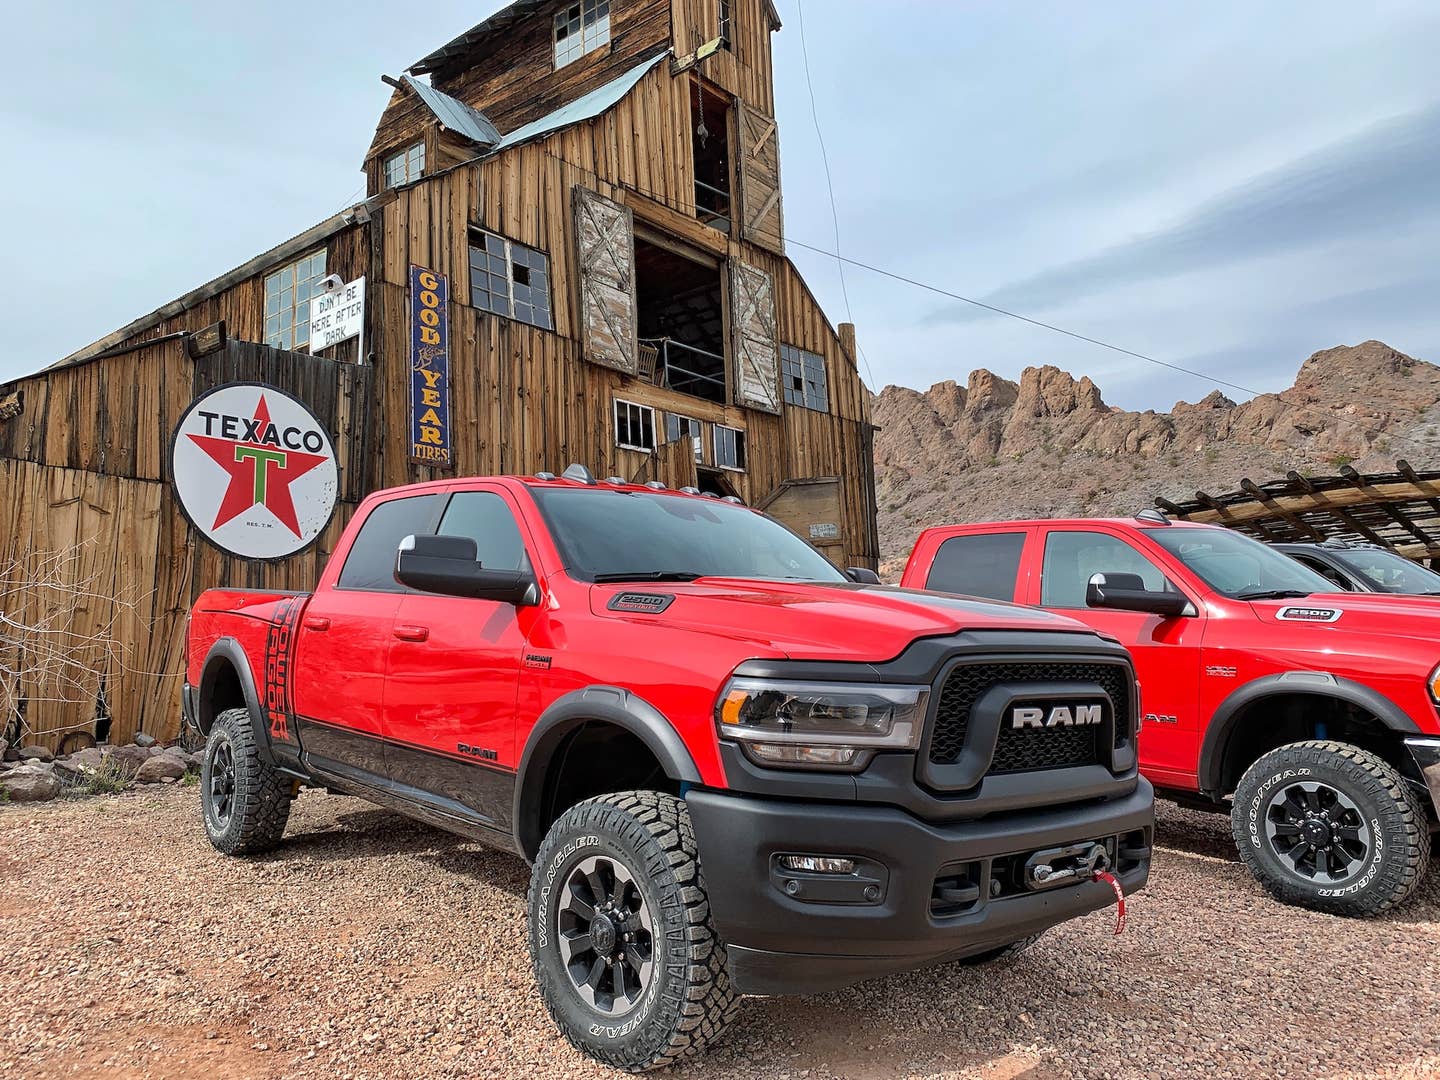 2019 Ram Heavy Duty Power Wagon first drive review